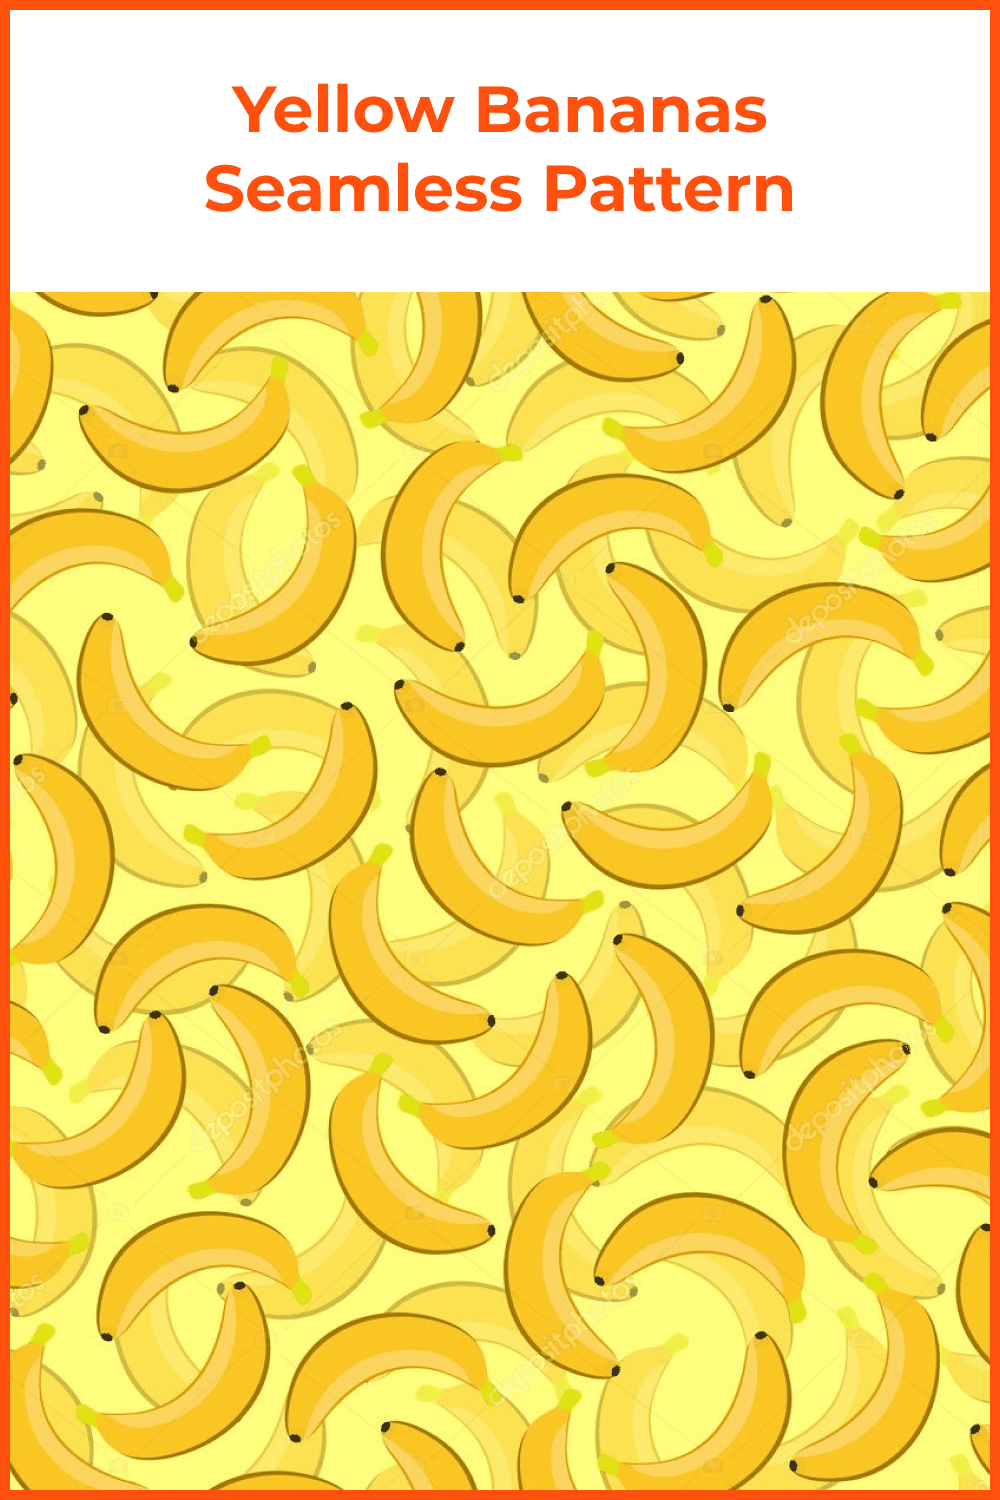 A lot of yellow bananas on the yellow background.